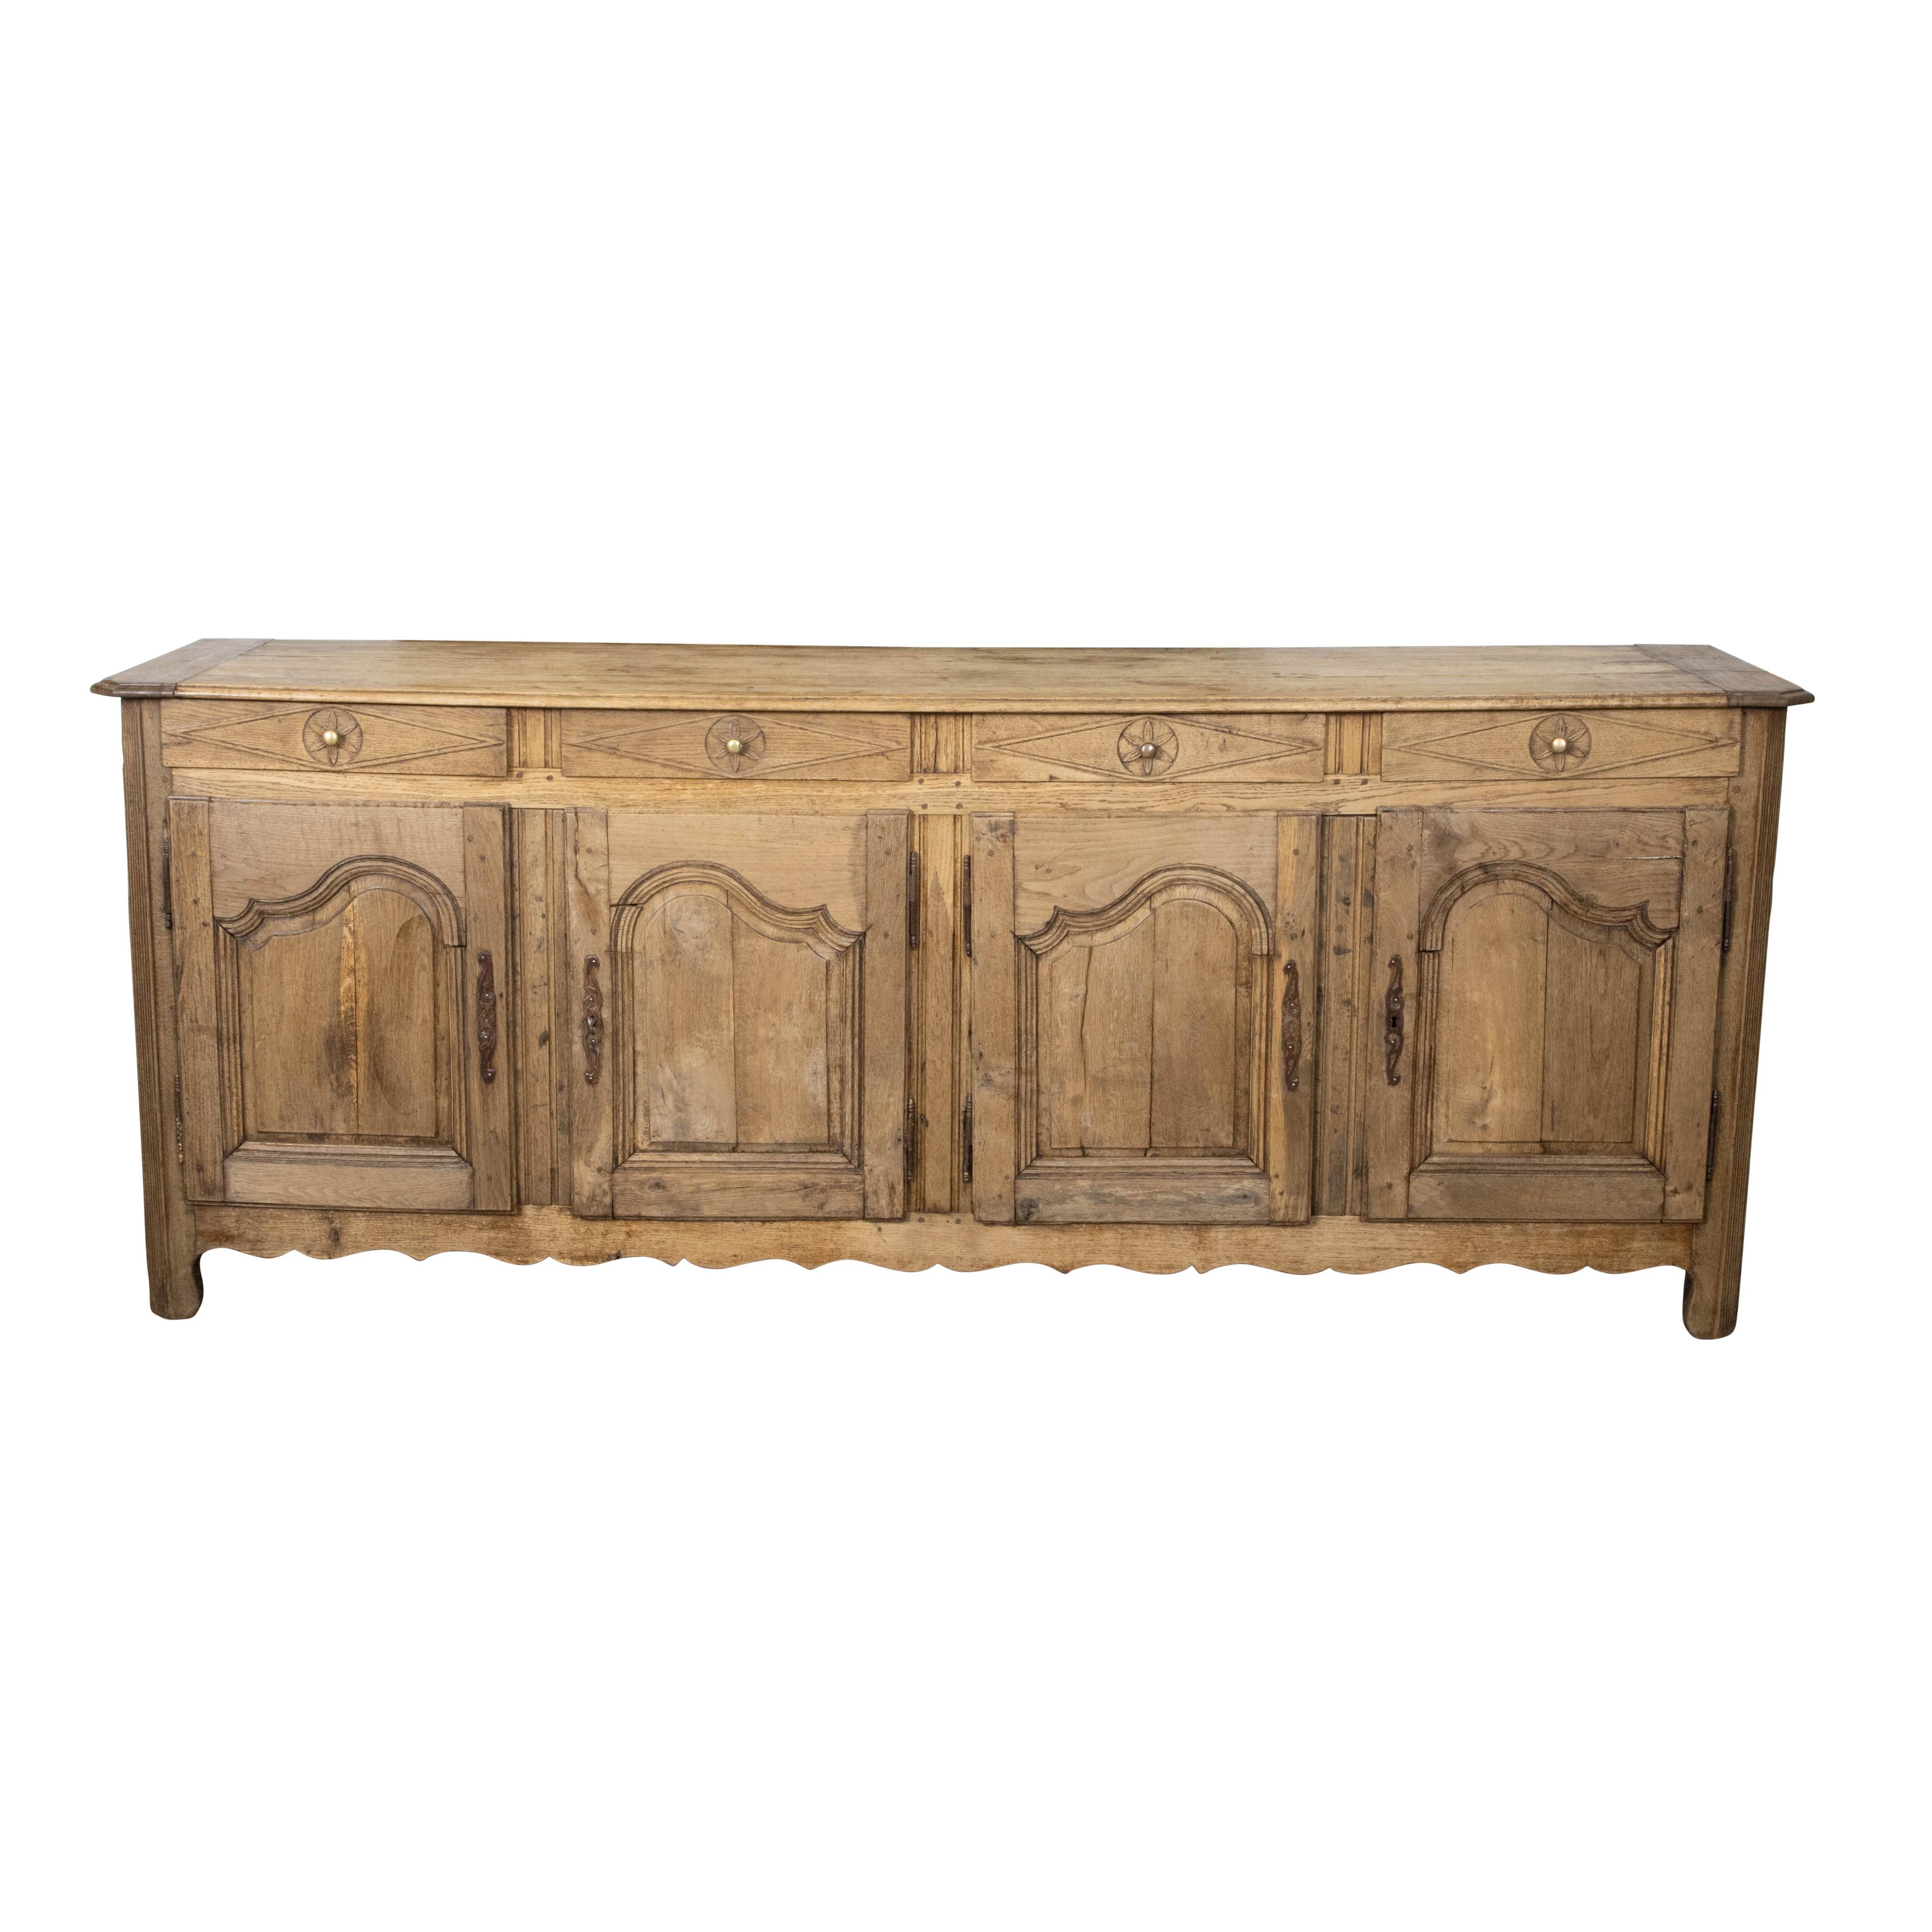 A French walnut enfilade from the 19th century with four drawers over four doors, carved motifs, scrolling feet and natural distressed patina. Charming us with its great proportions and rustic character, this walnut enfilade was created in France